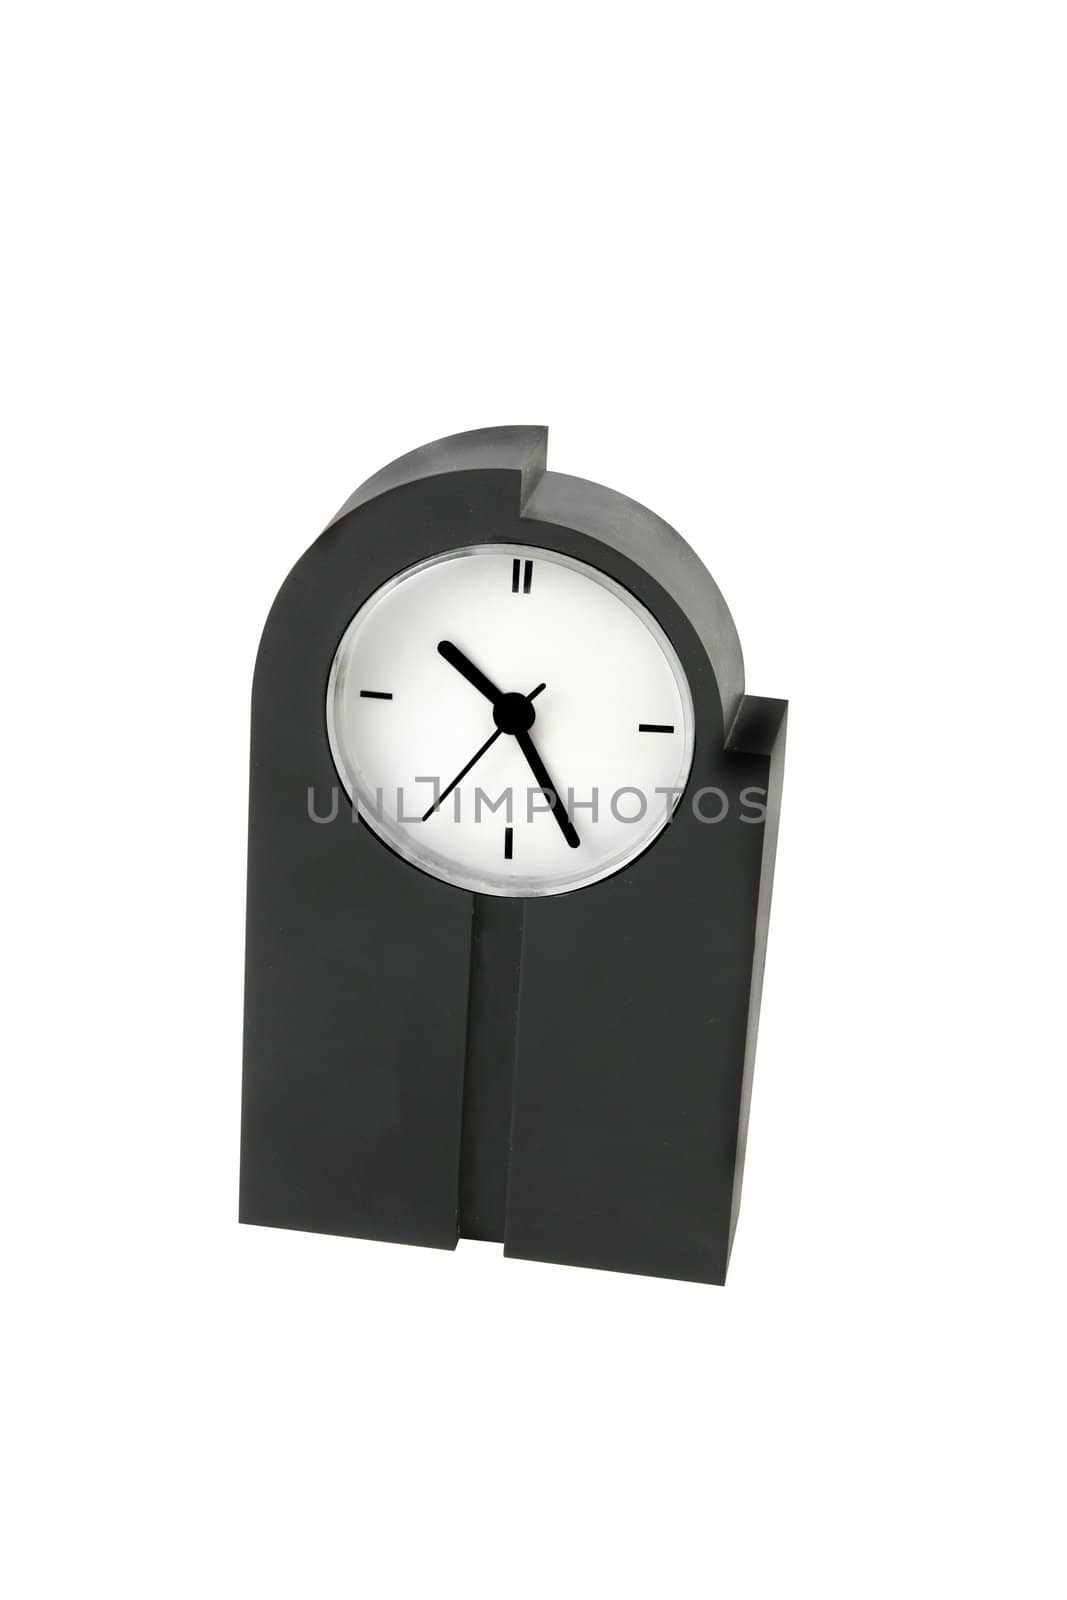 Decorative carriage clock by phovoir